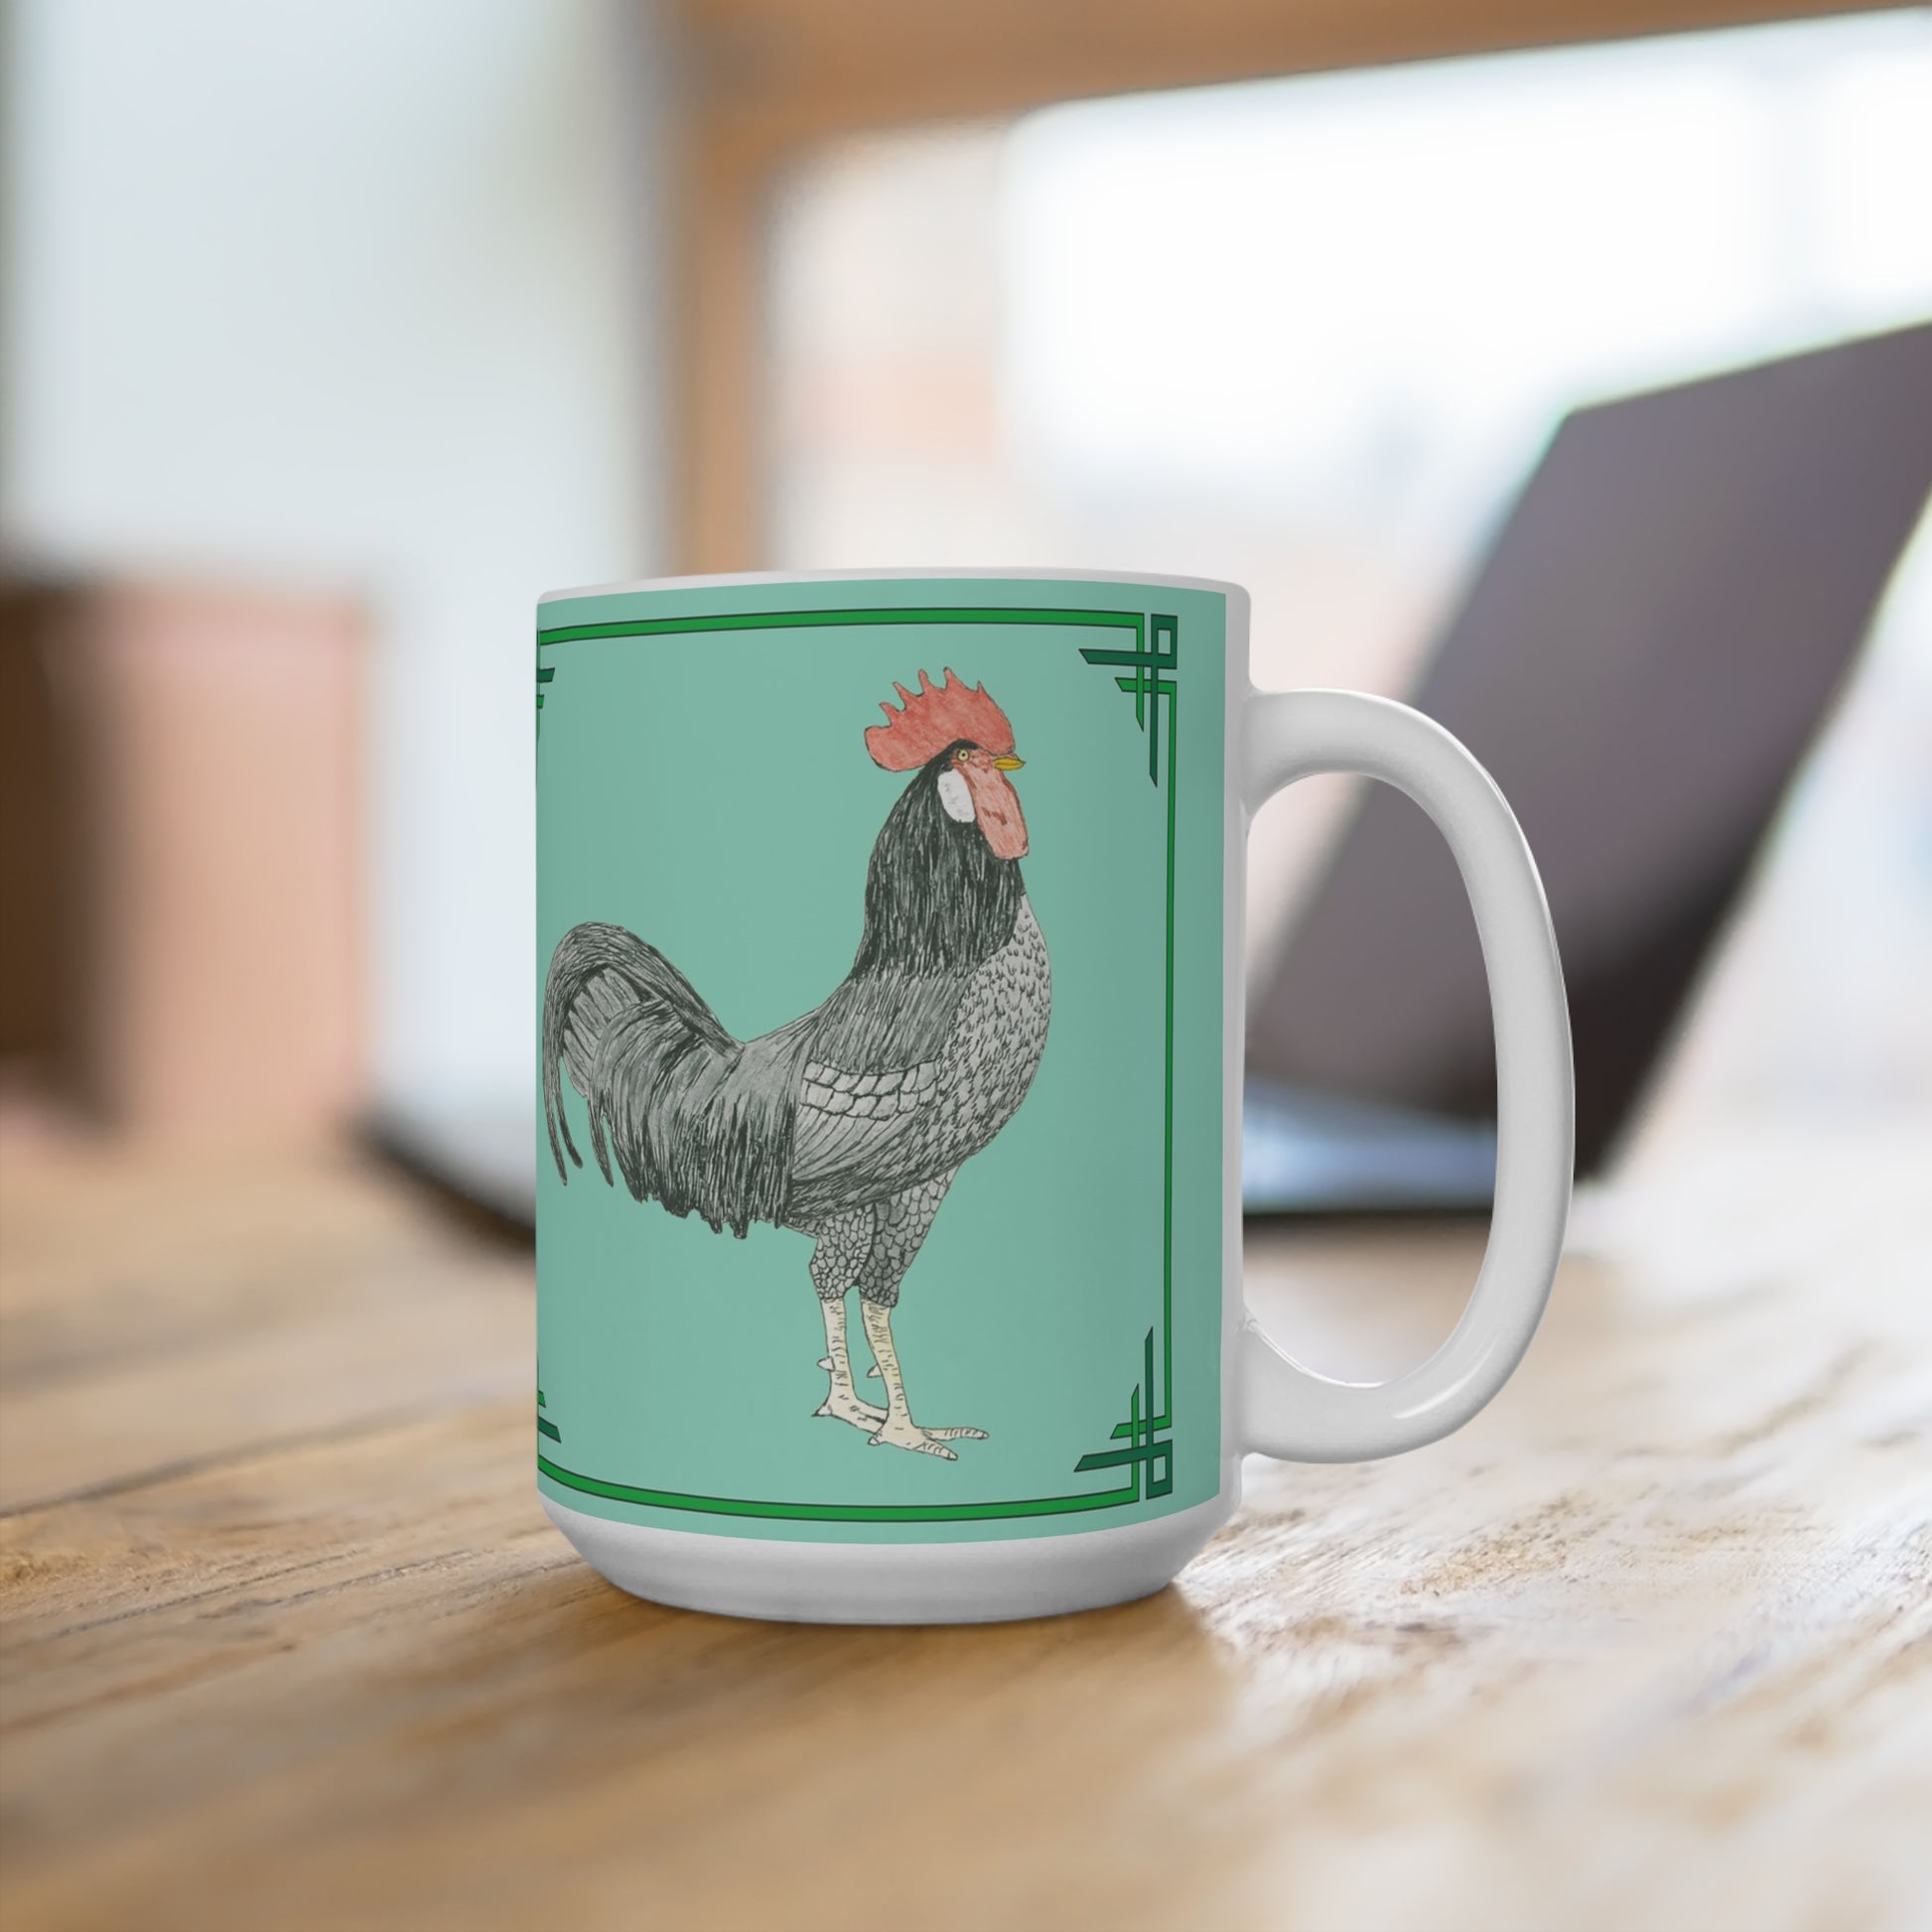 Enjoy your favorite beverage while you work on the laptop with our 15oz. Adam Rooster mug